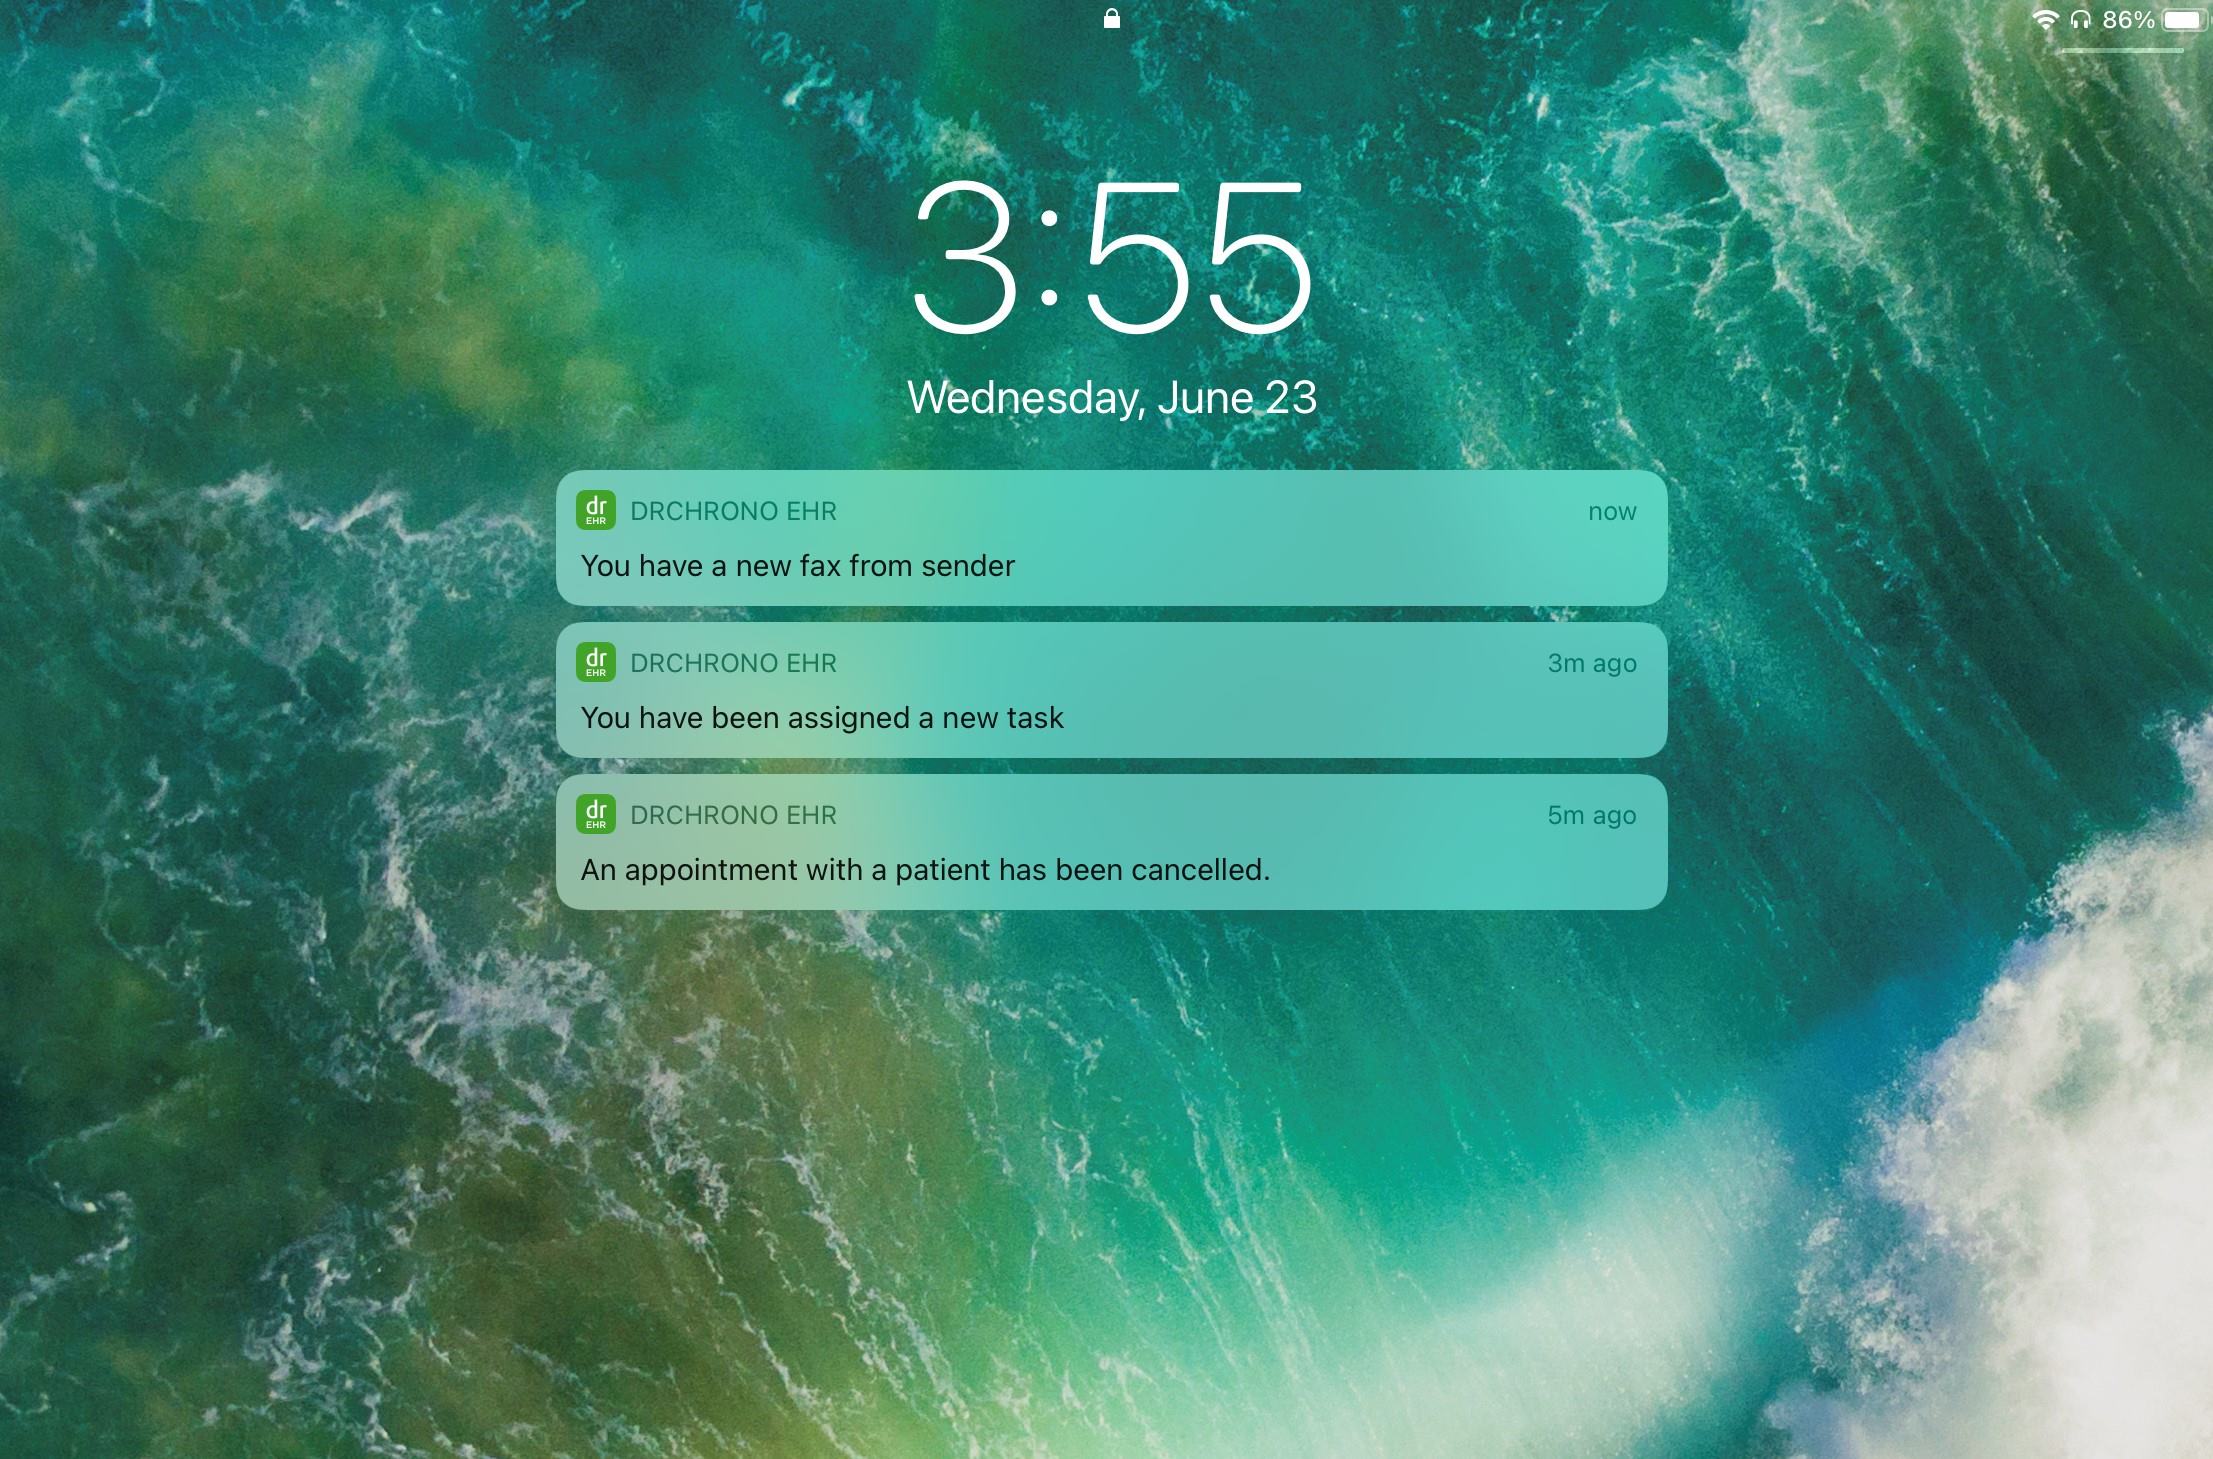 How To Manage Push Notifications On The IPad